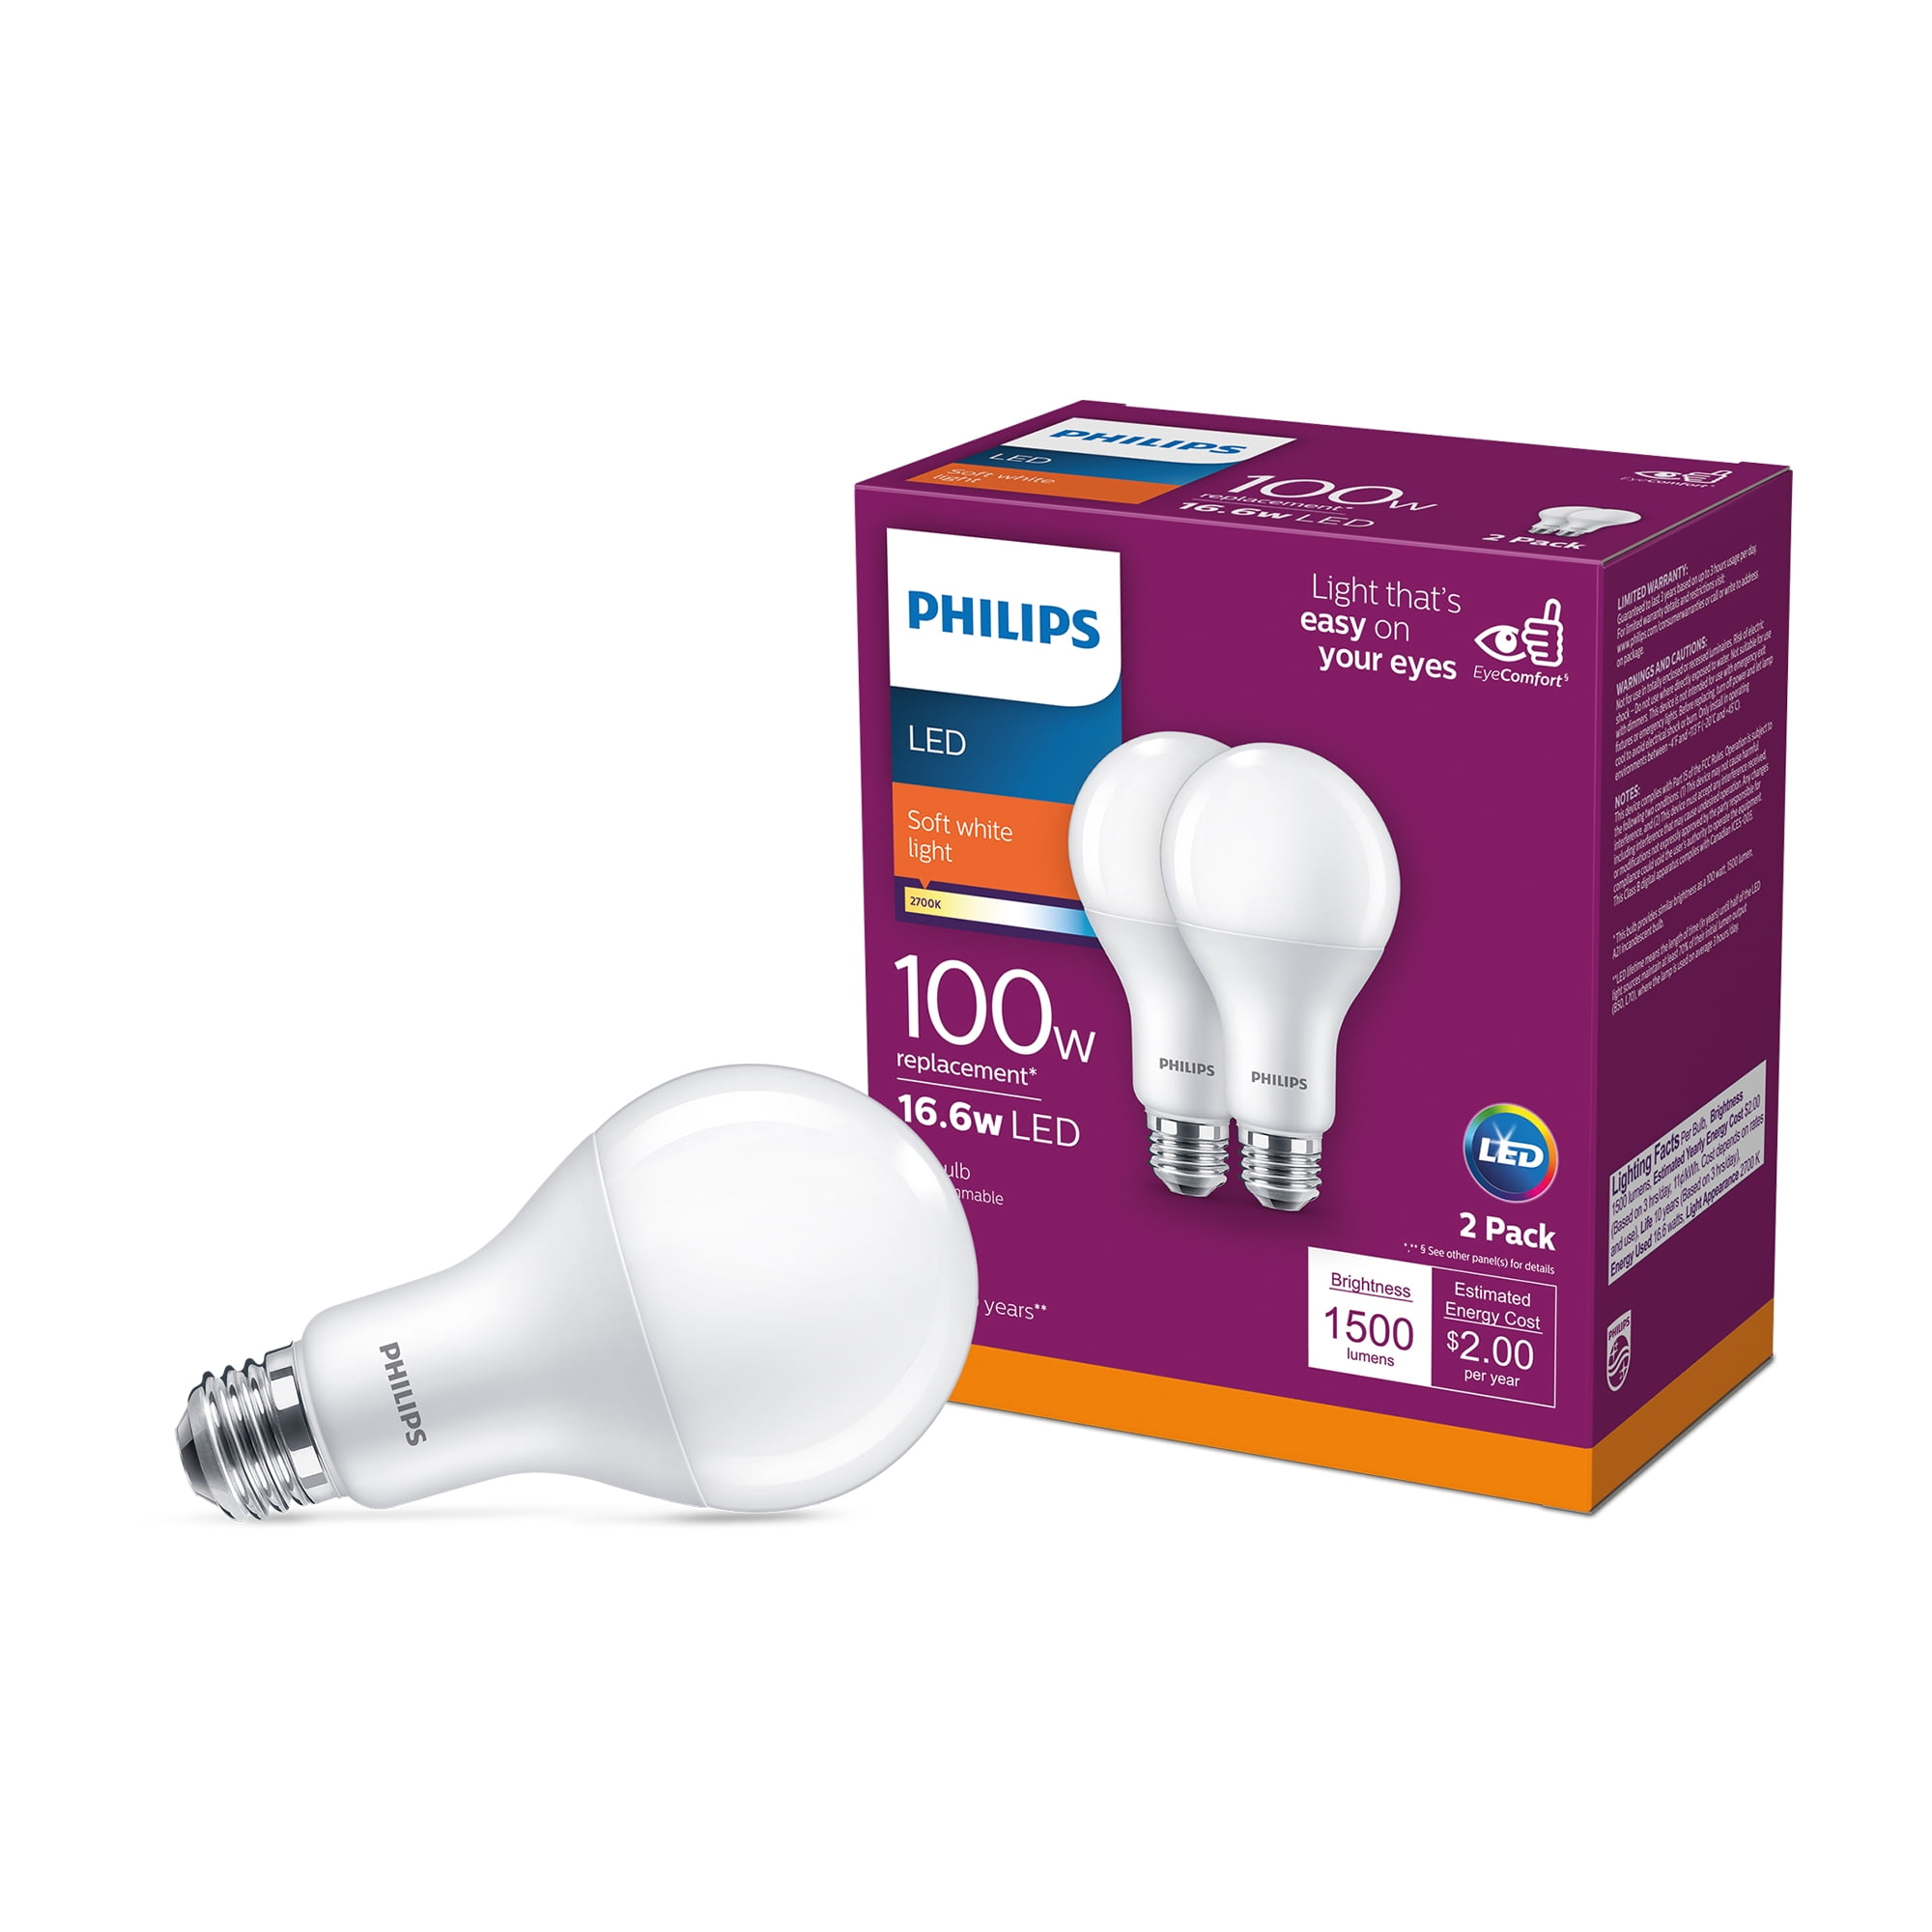 Philips LED 100-Watt A21 General Purpose Bulb, Frosted Soft White, Non-Dimmable, E26 Medium Base (2-Pack) - Walmart.com